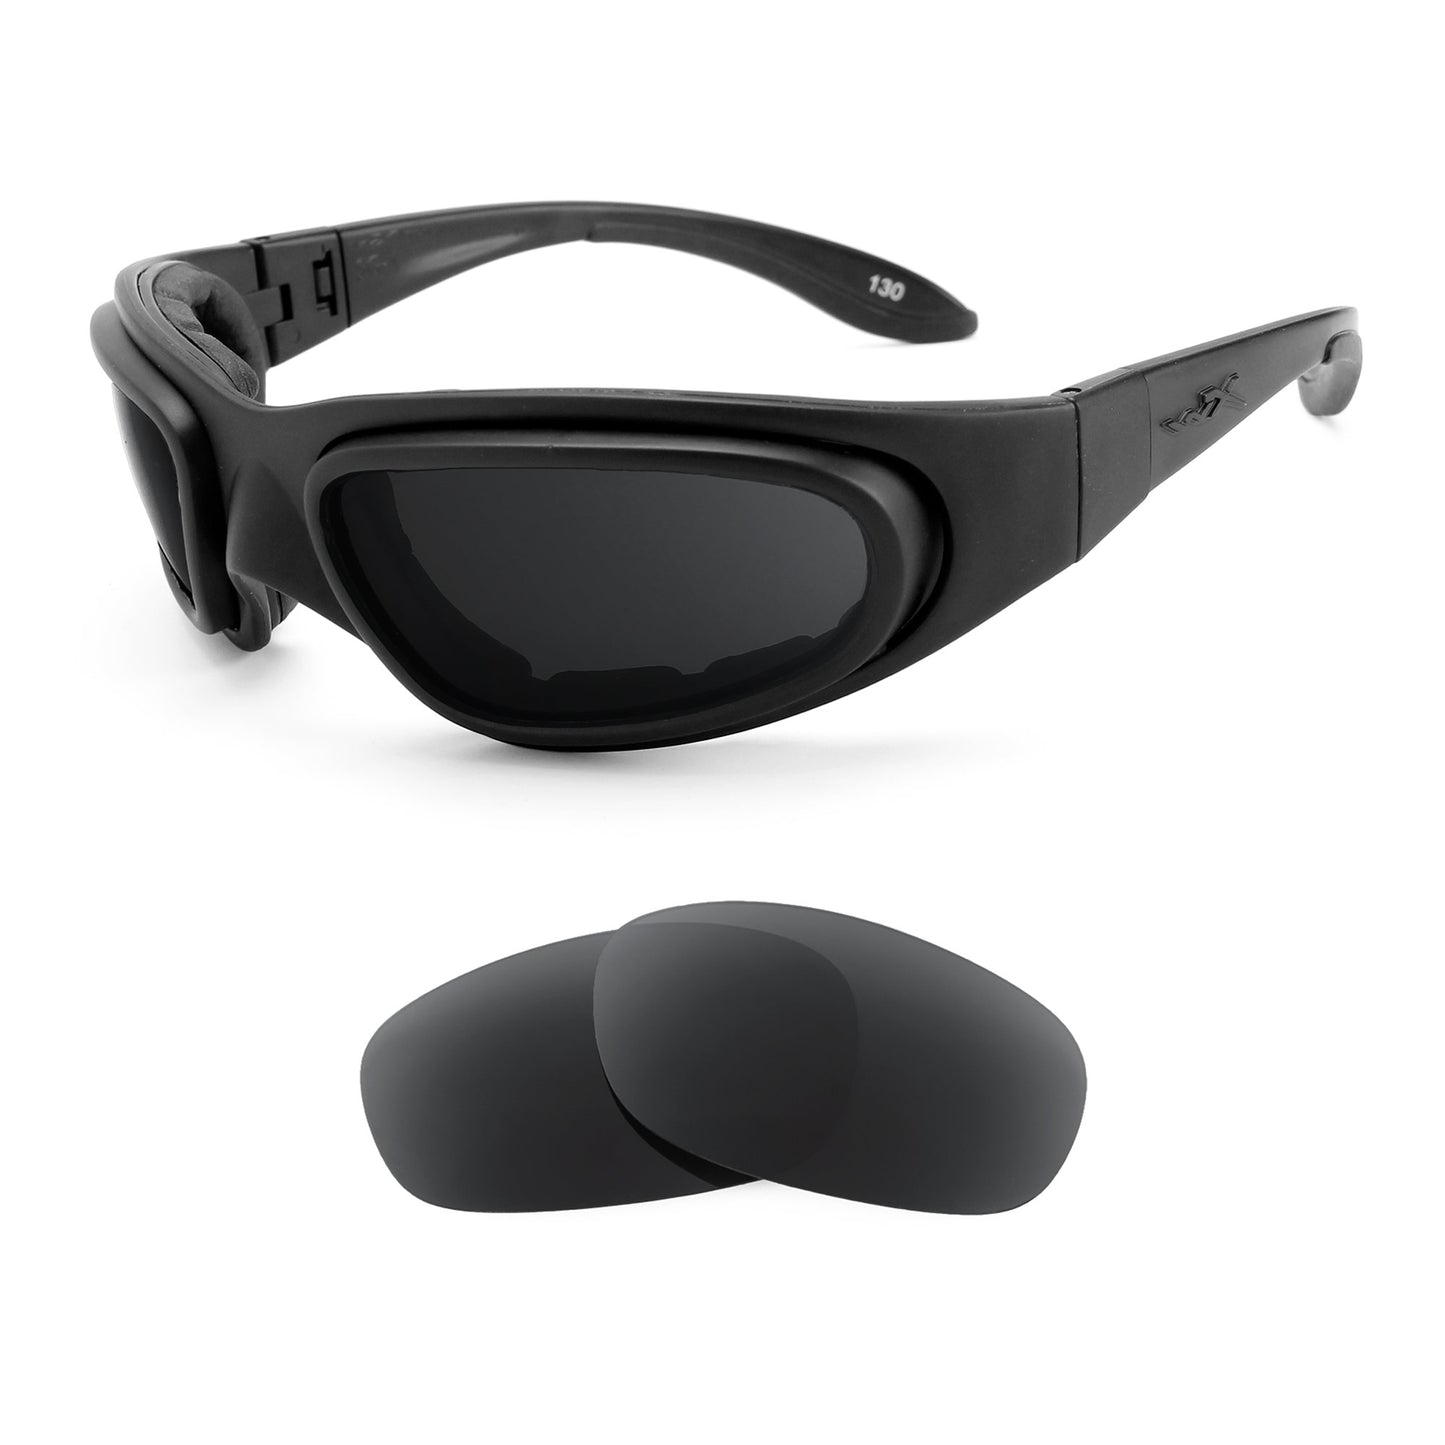 Wiley X SG-1 sunglasses with replacement lenses